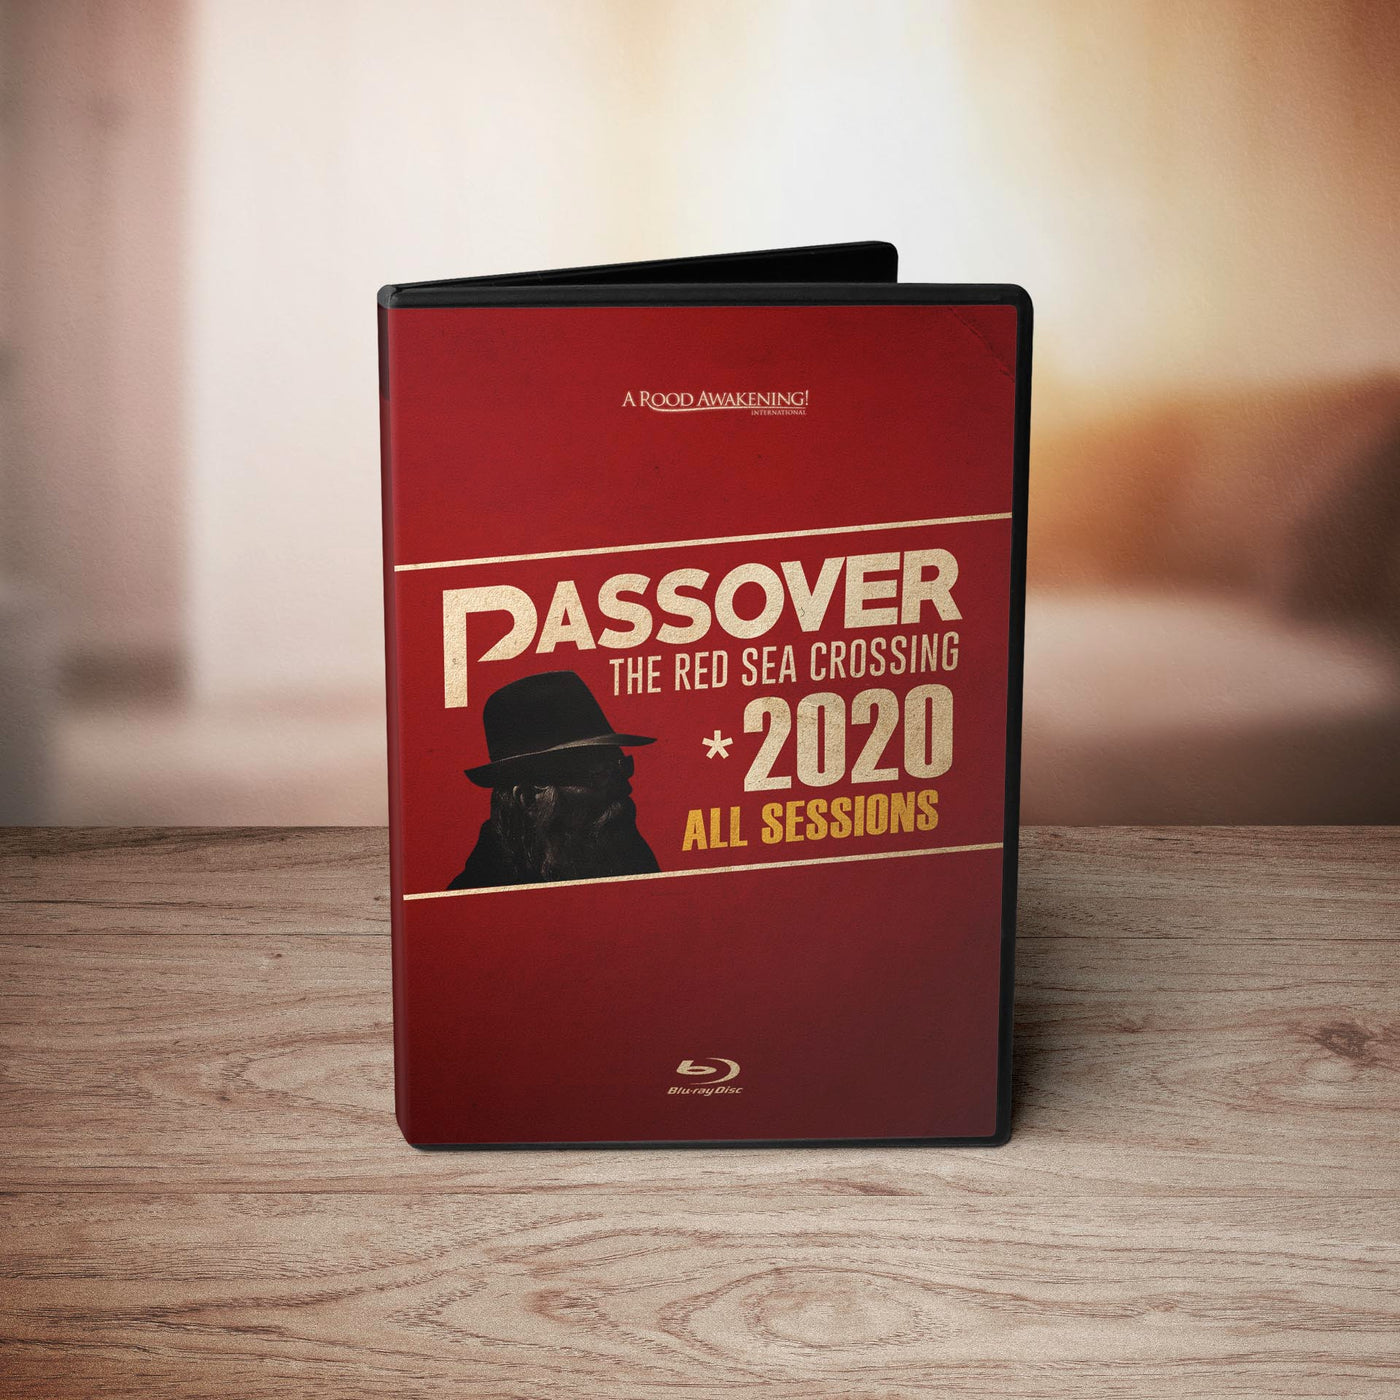 Passover 2020: The Red Sea Crossing